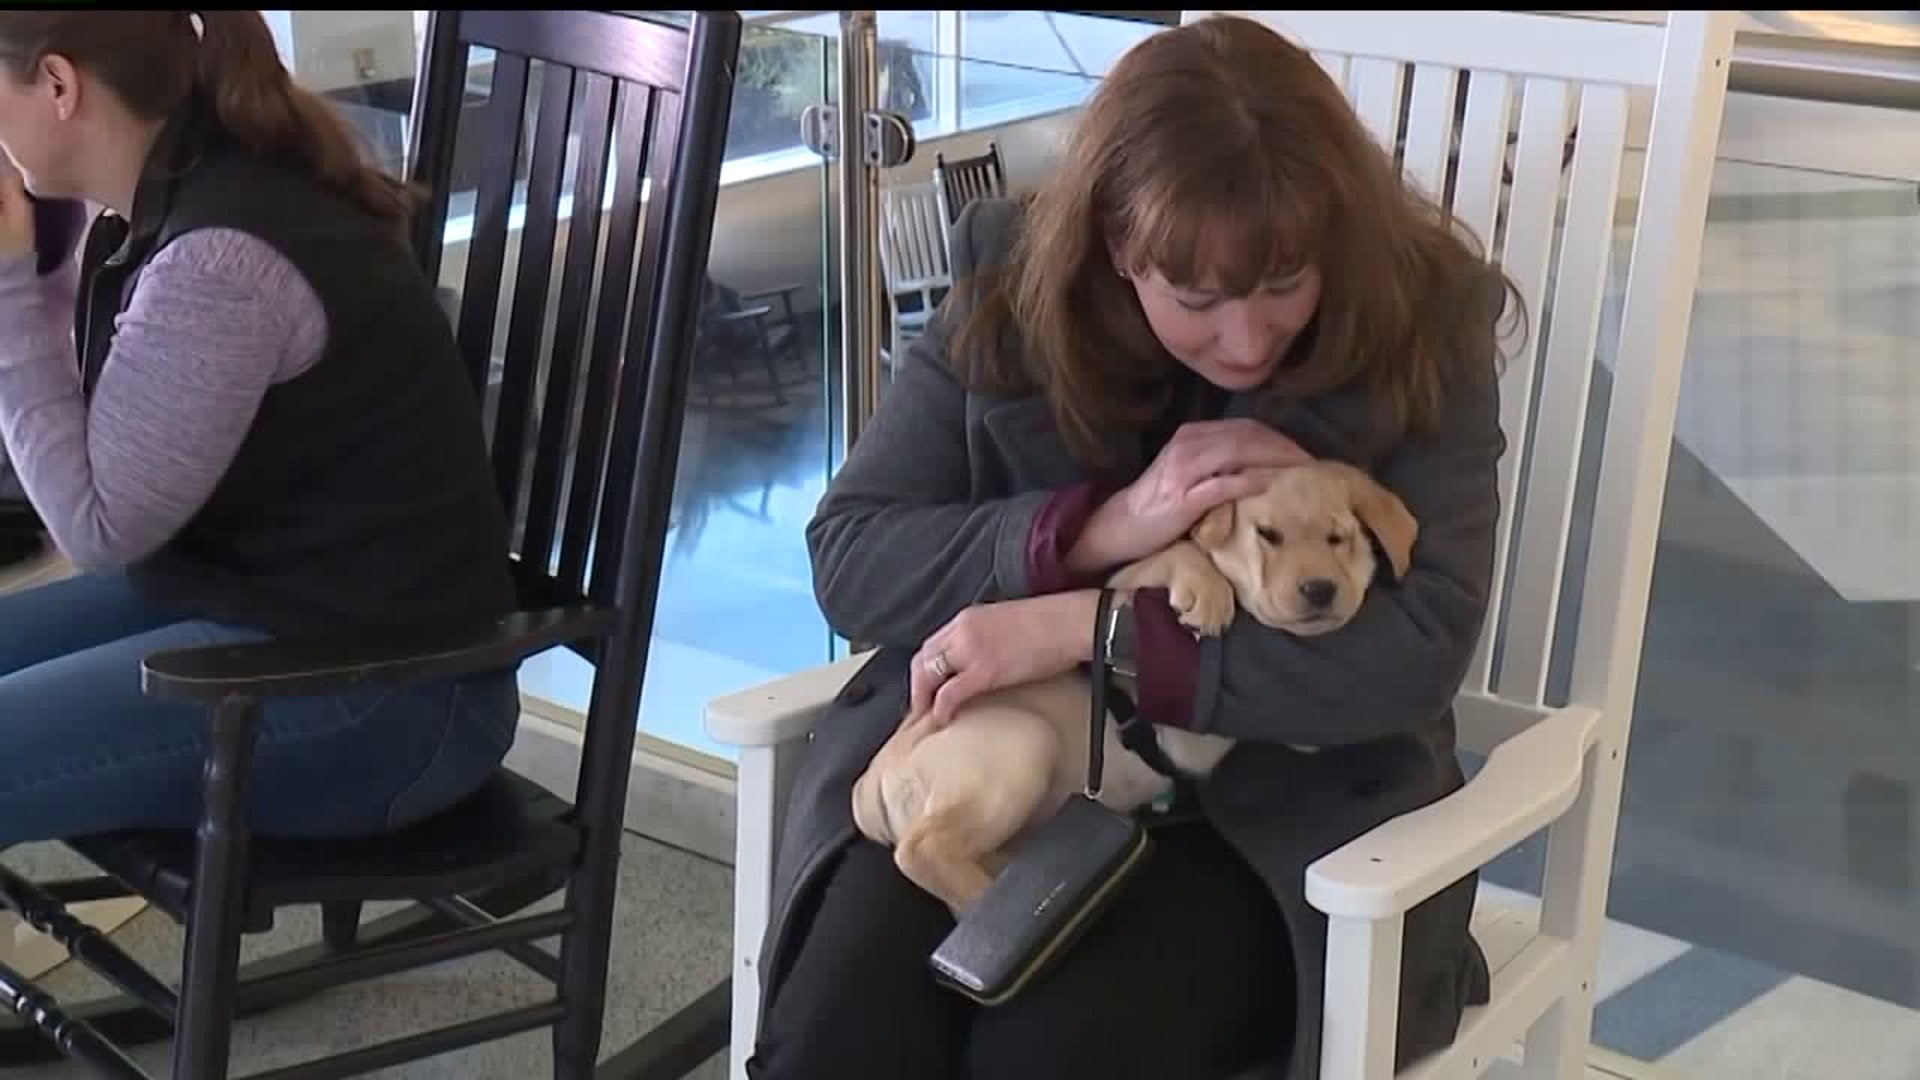 Puppies ease tension for travelers